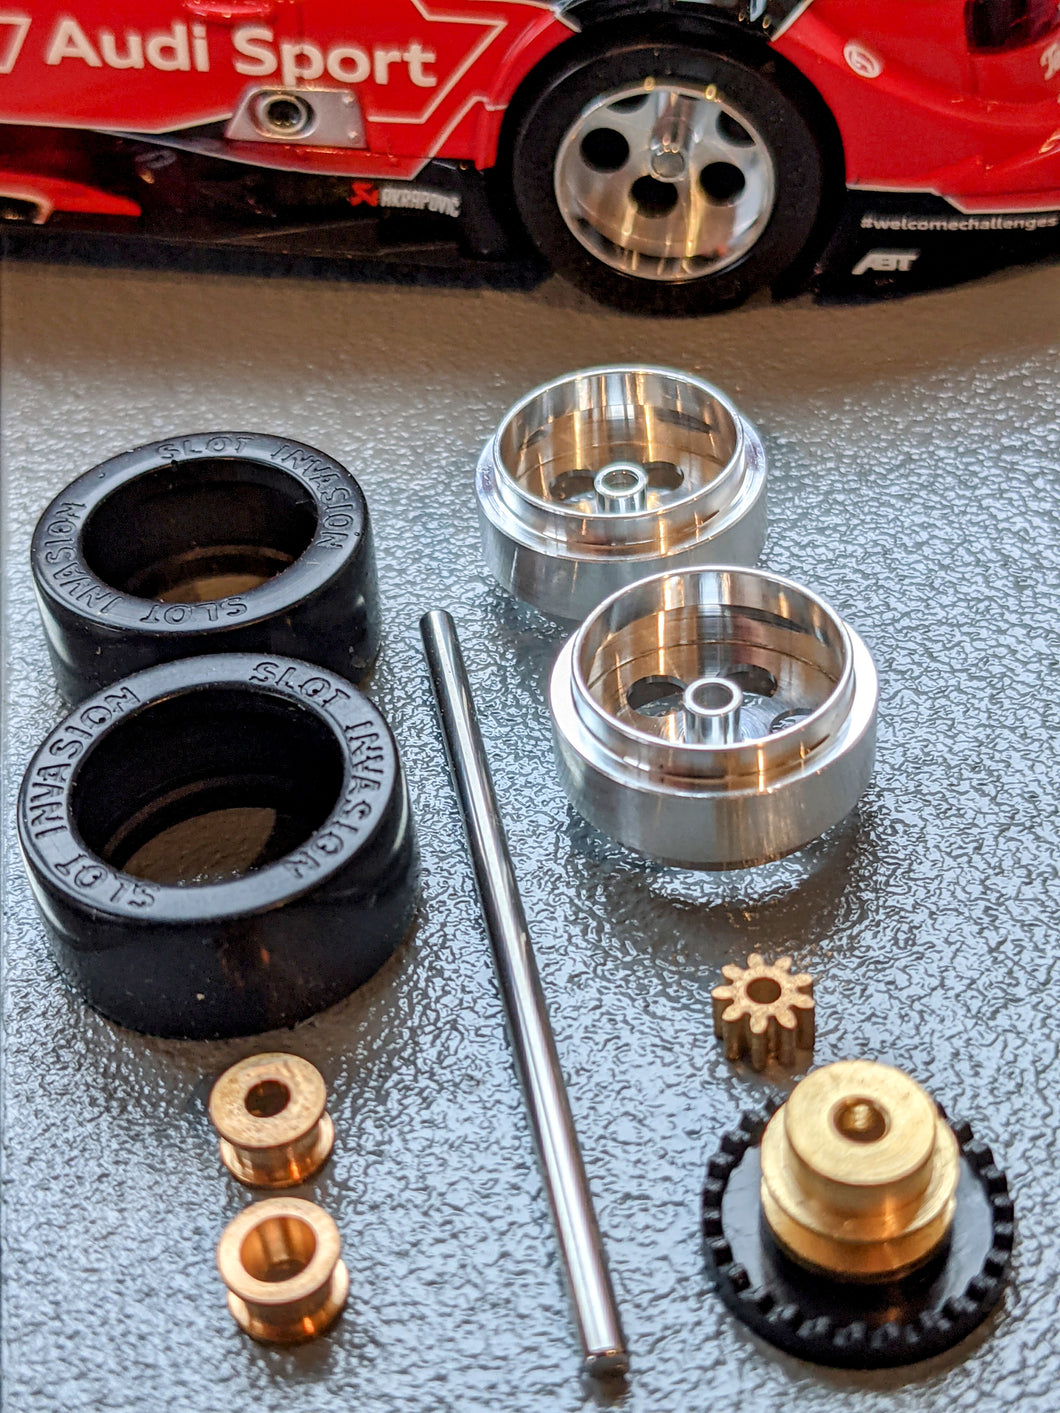 1/32 Carrera(R) DTM Tuning Complete rear kit